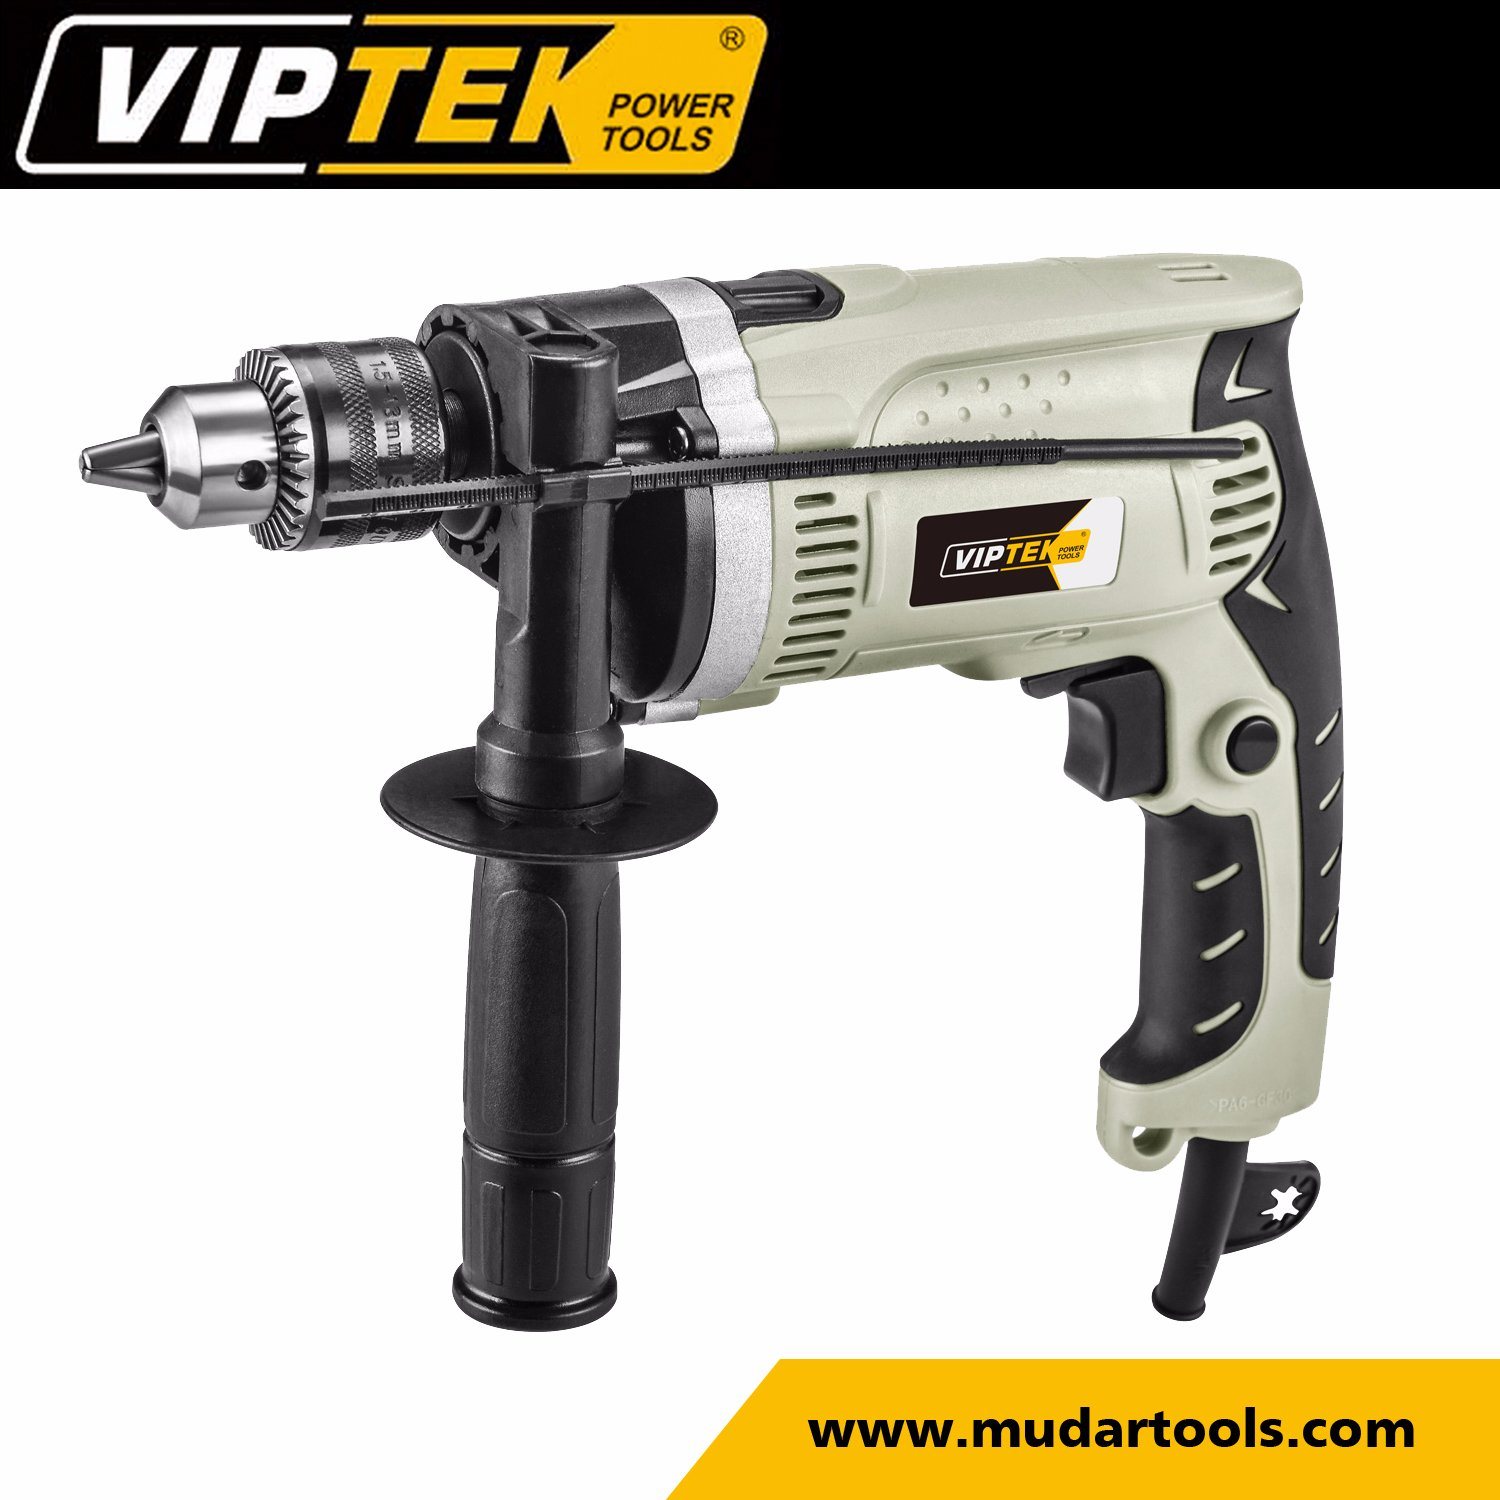 600W 13mm Variable Speed Electric Drill